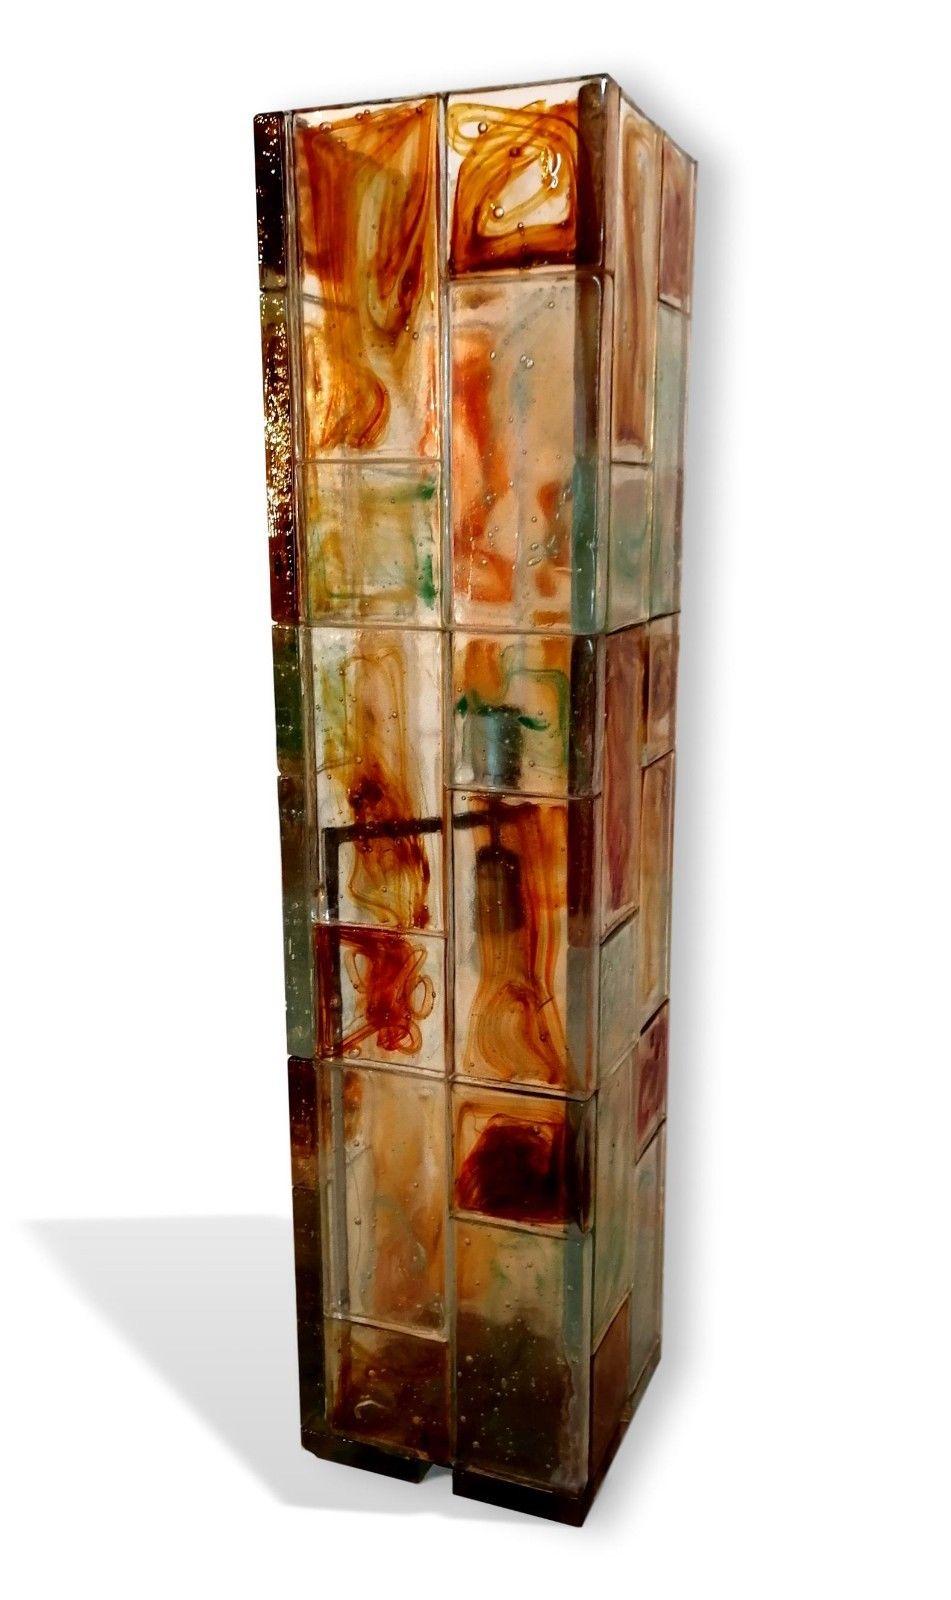 Splendid original floor lamp from the 70s, a relevant parallelepiped in thick glass (2 centimeters), variegated in the most disparate colors, very heavy, production Poliarte

Both on and off it is a piece of furniture of rare beauty, functional